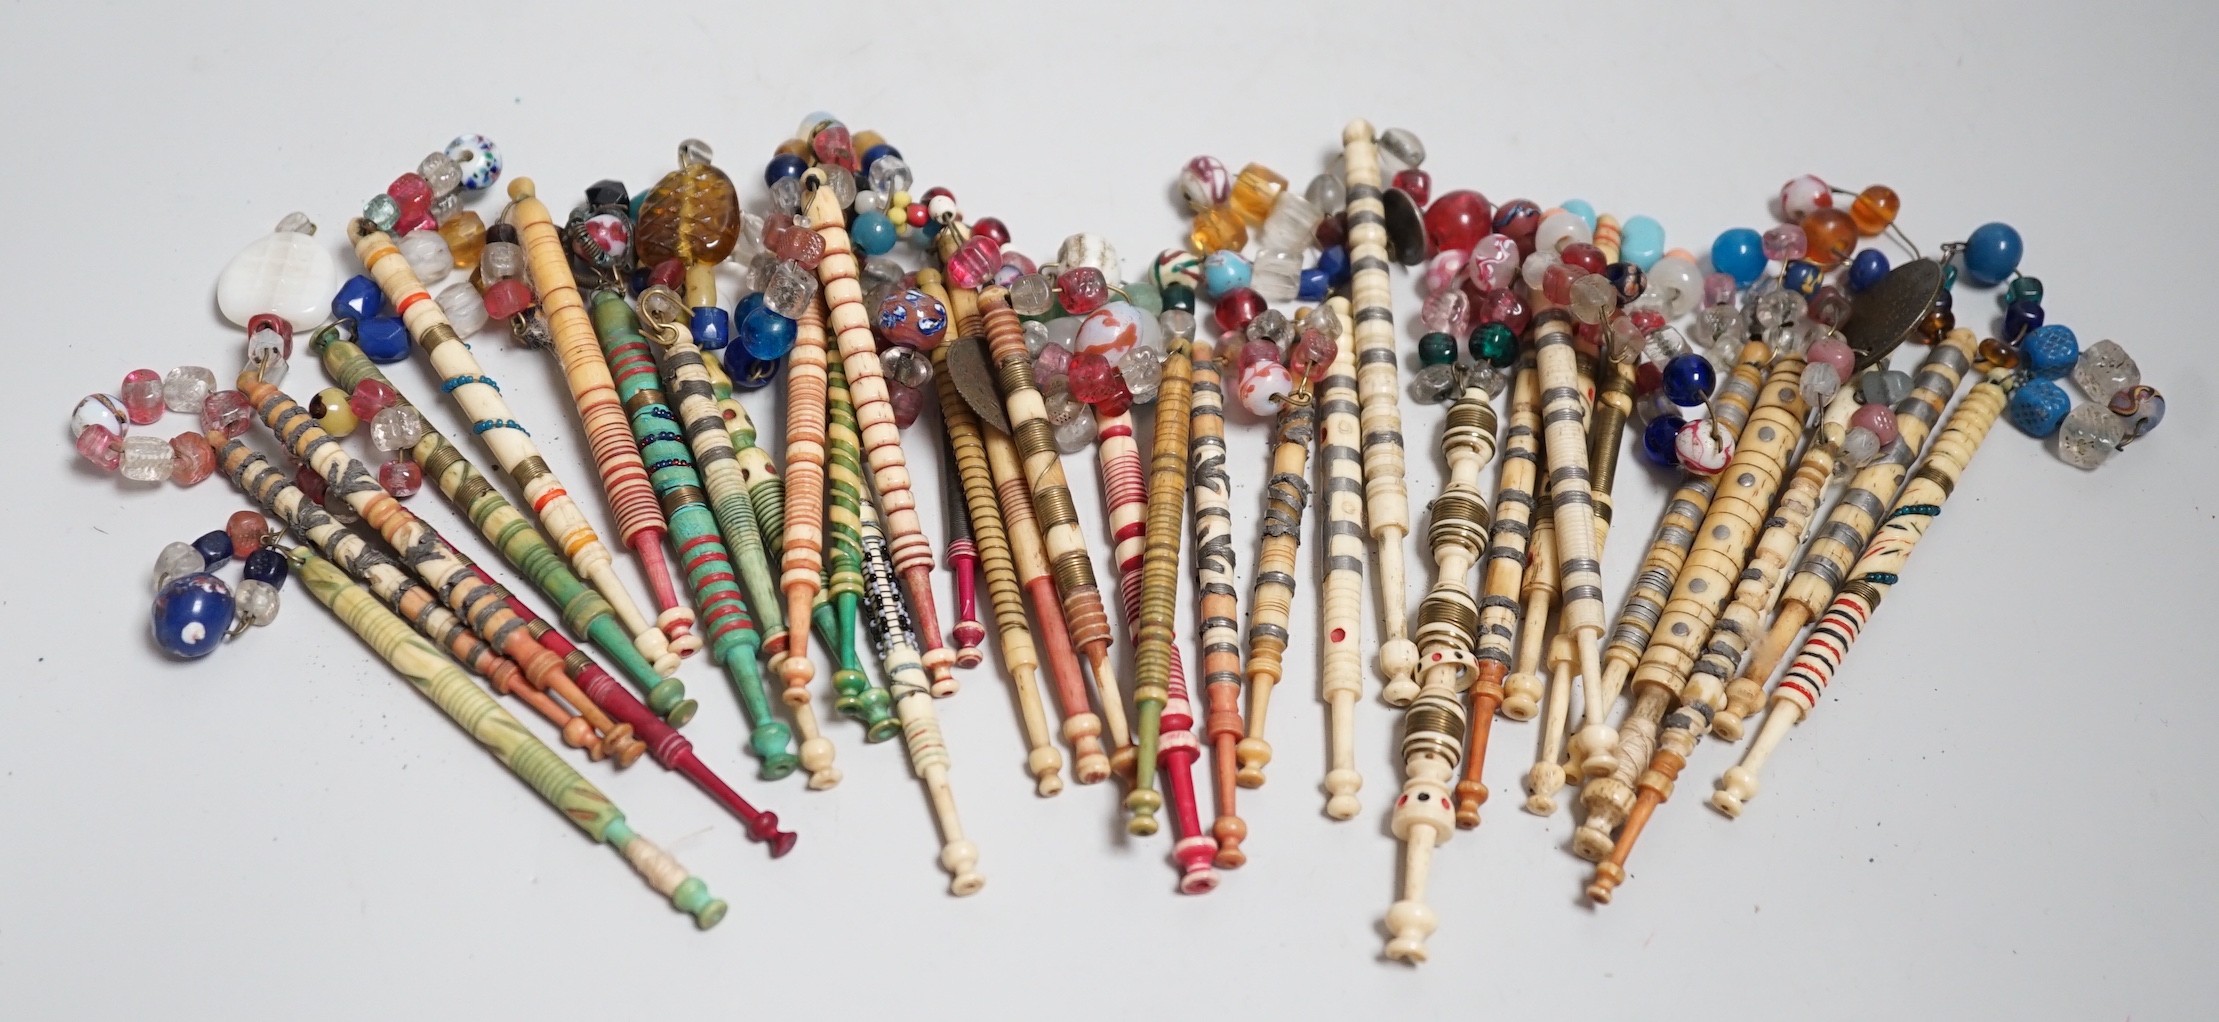 Twenty one 19th century stained and turned bone lace bobbins with glass bead tops and thirteen ornate bone and metal decorated lace bobbins with bead tops (35)